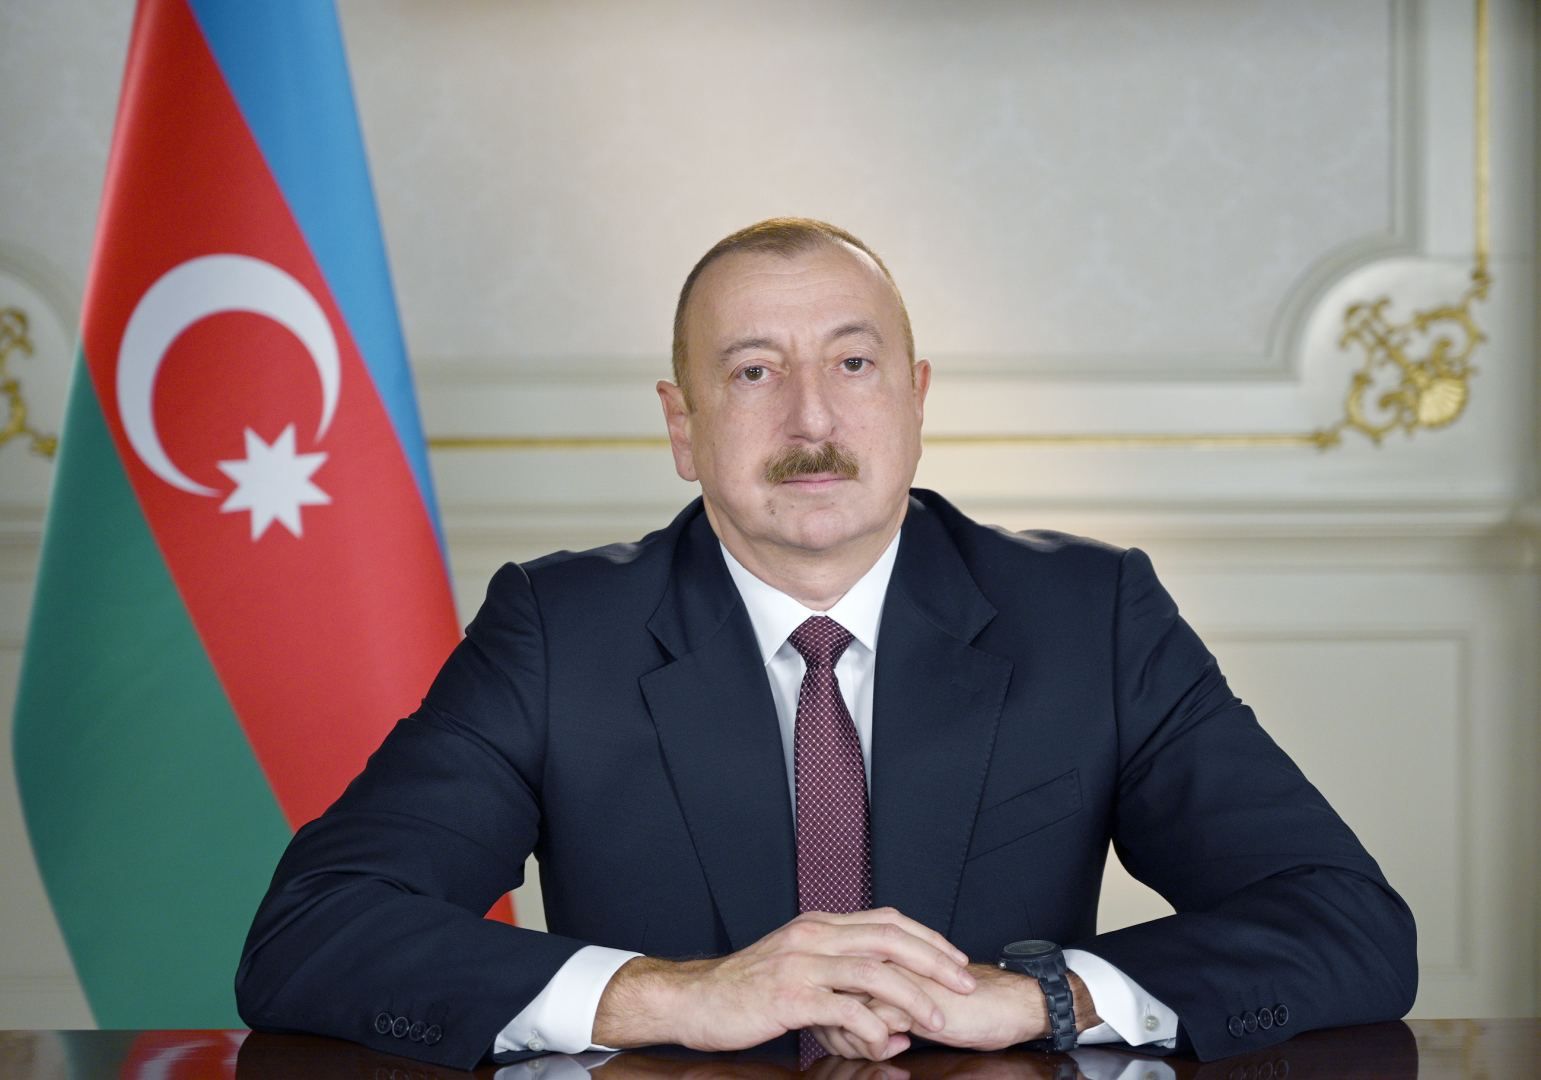 President Ilham Aliyev approves amendments to Law "On status of Member of Parliament"